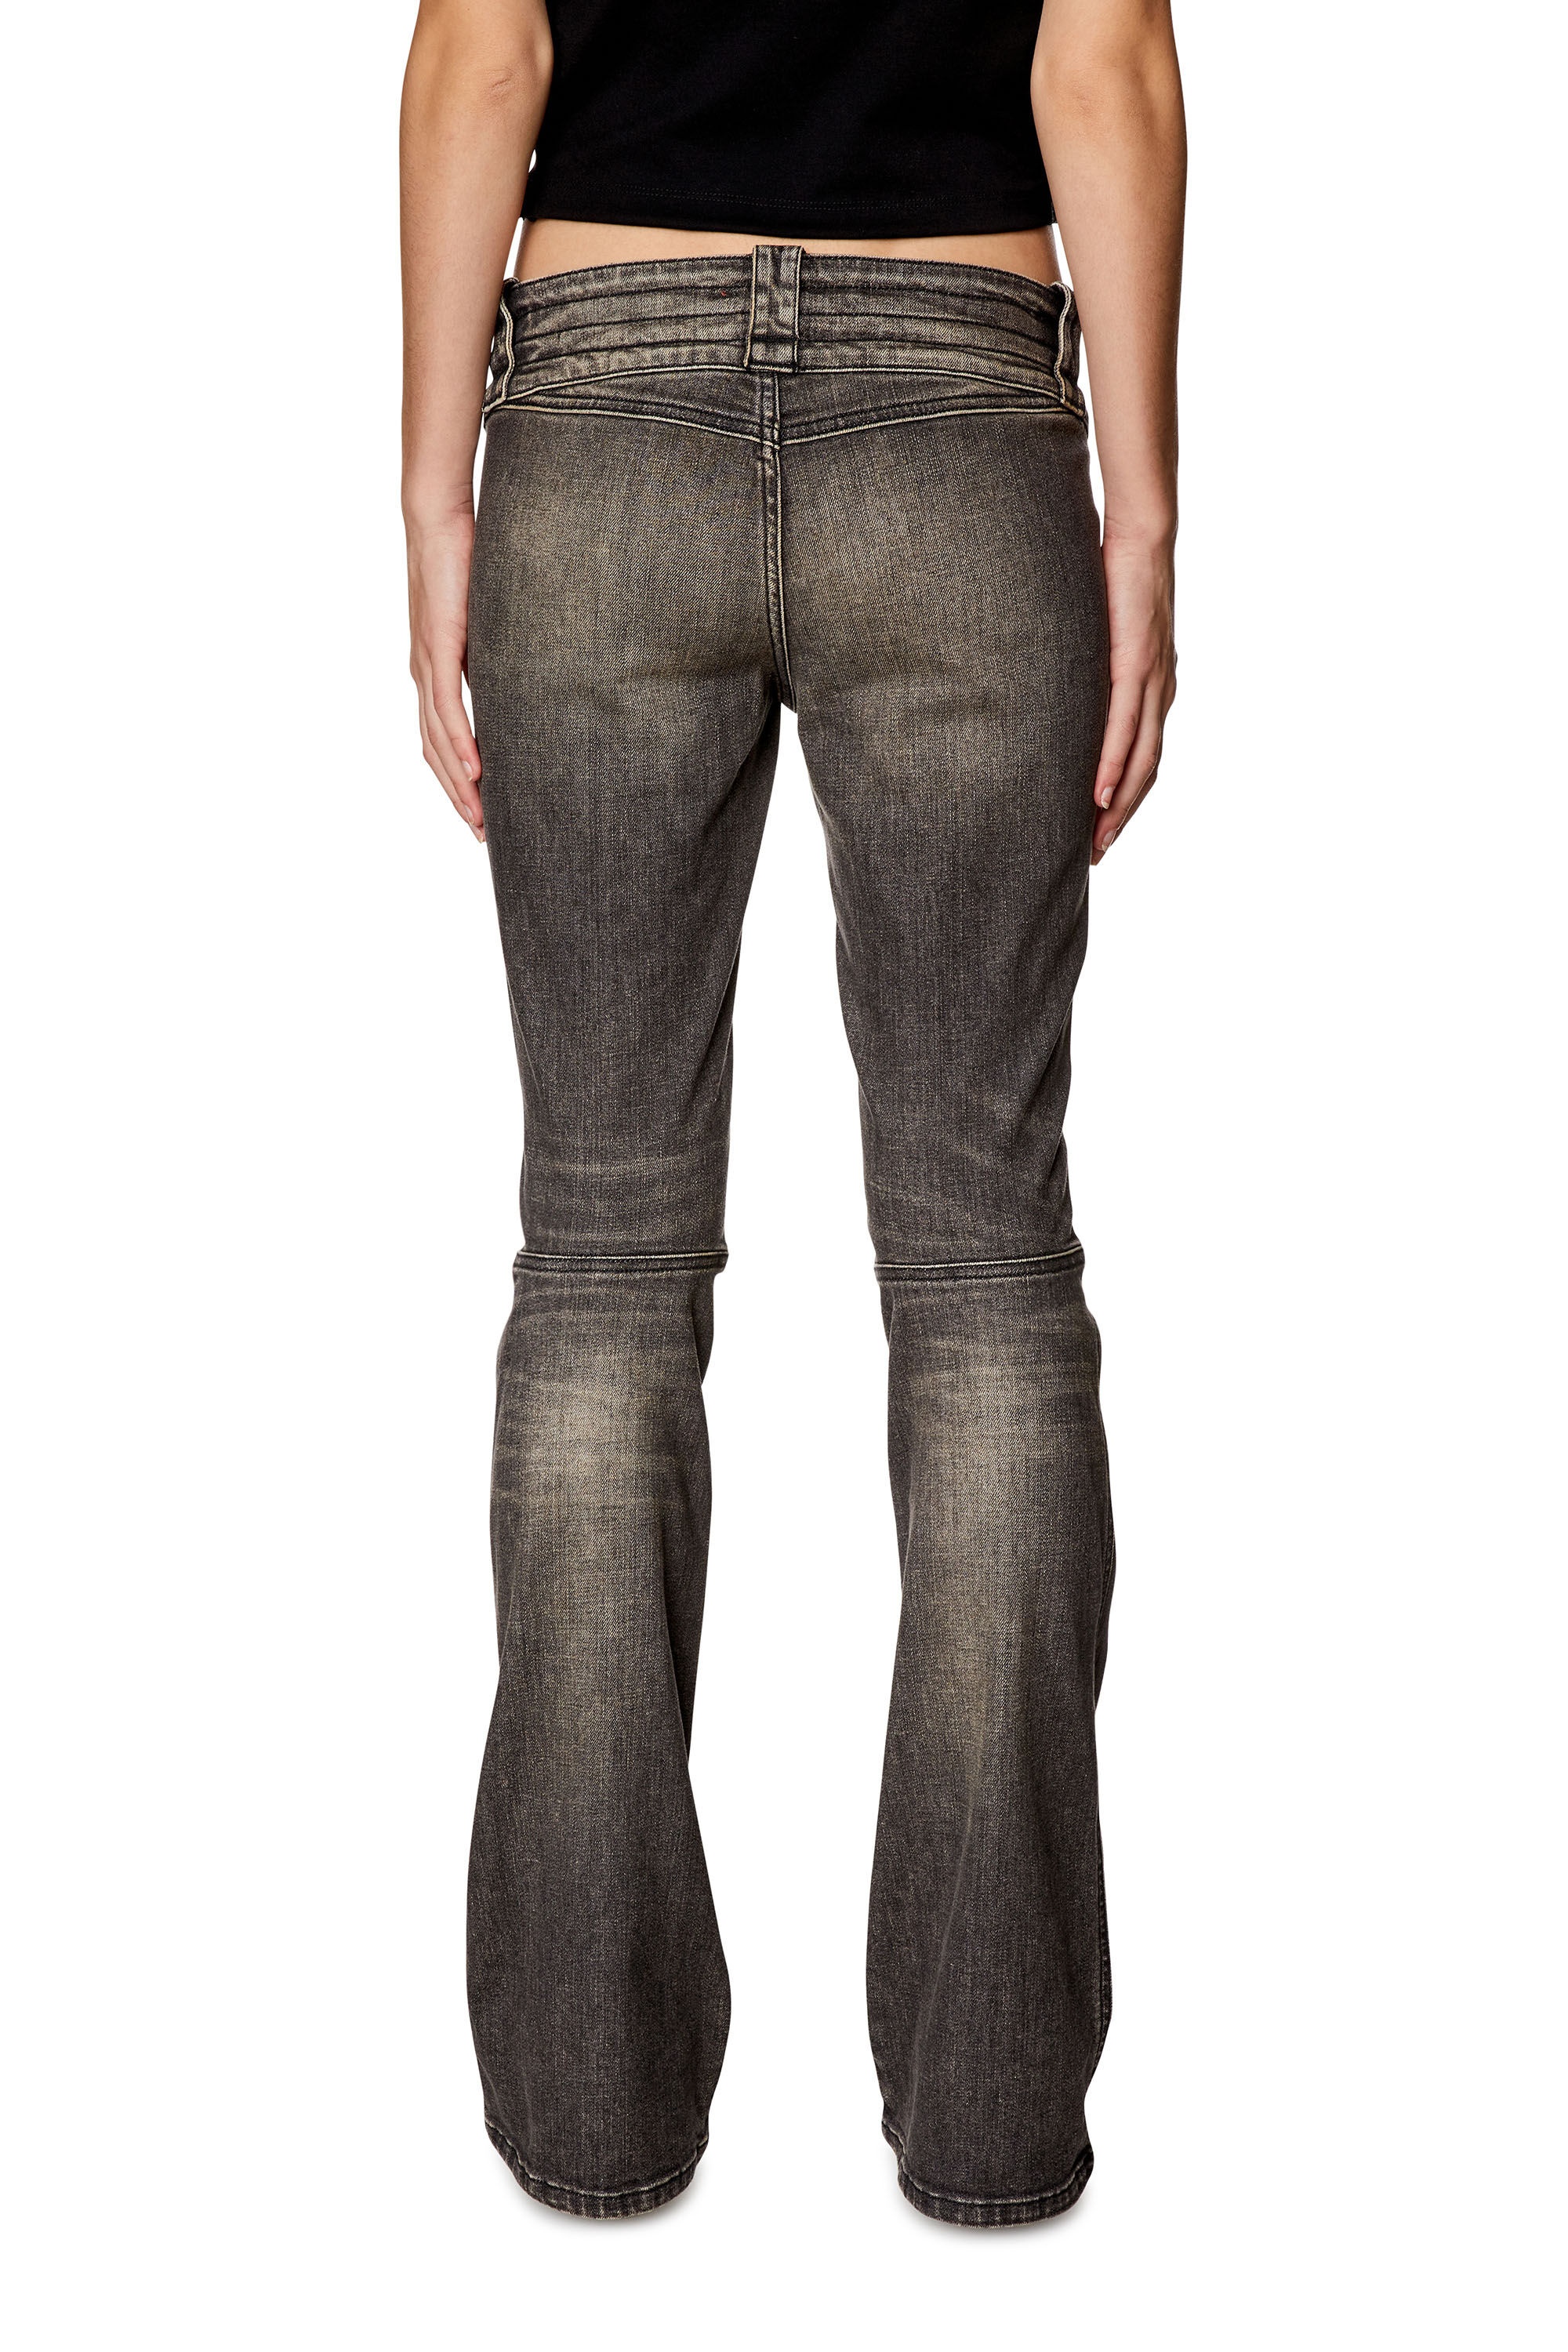 BOOTCUT AND FLARE JEANS BELTHY 0JGAL